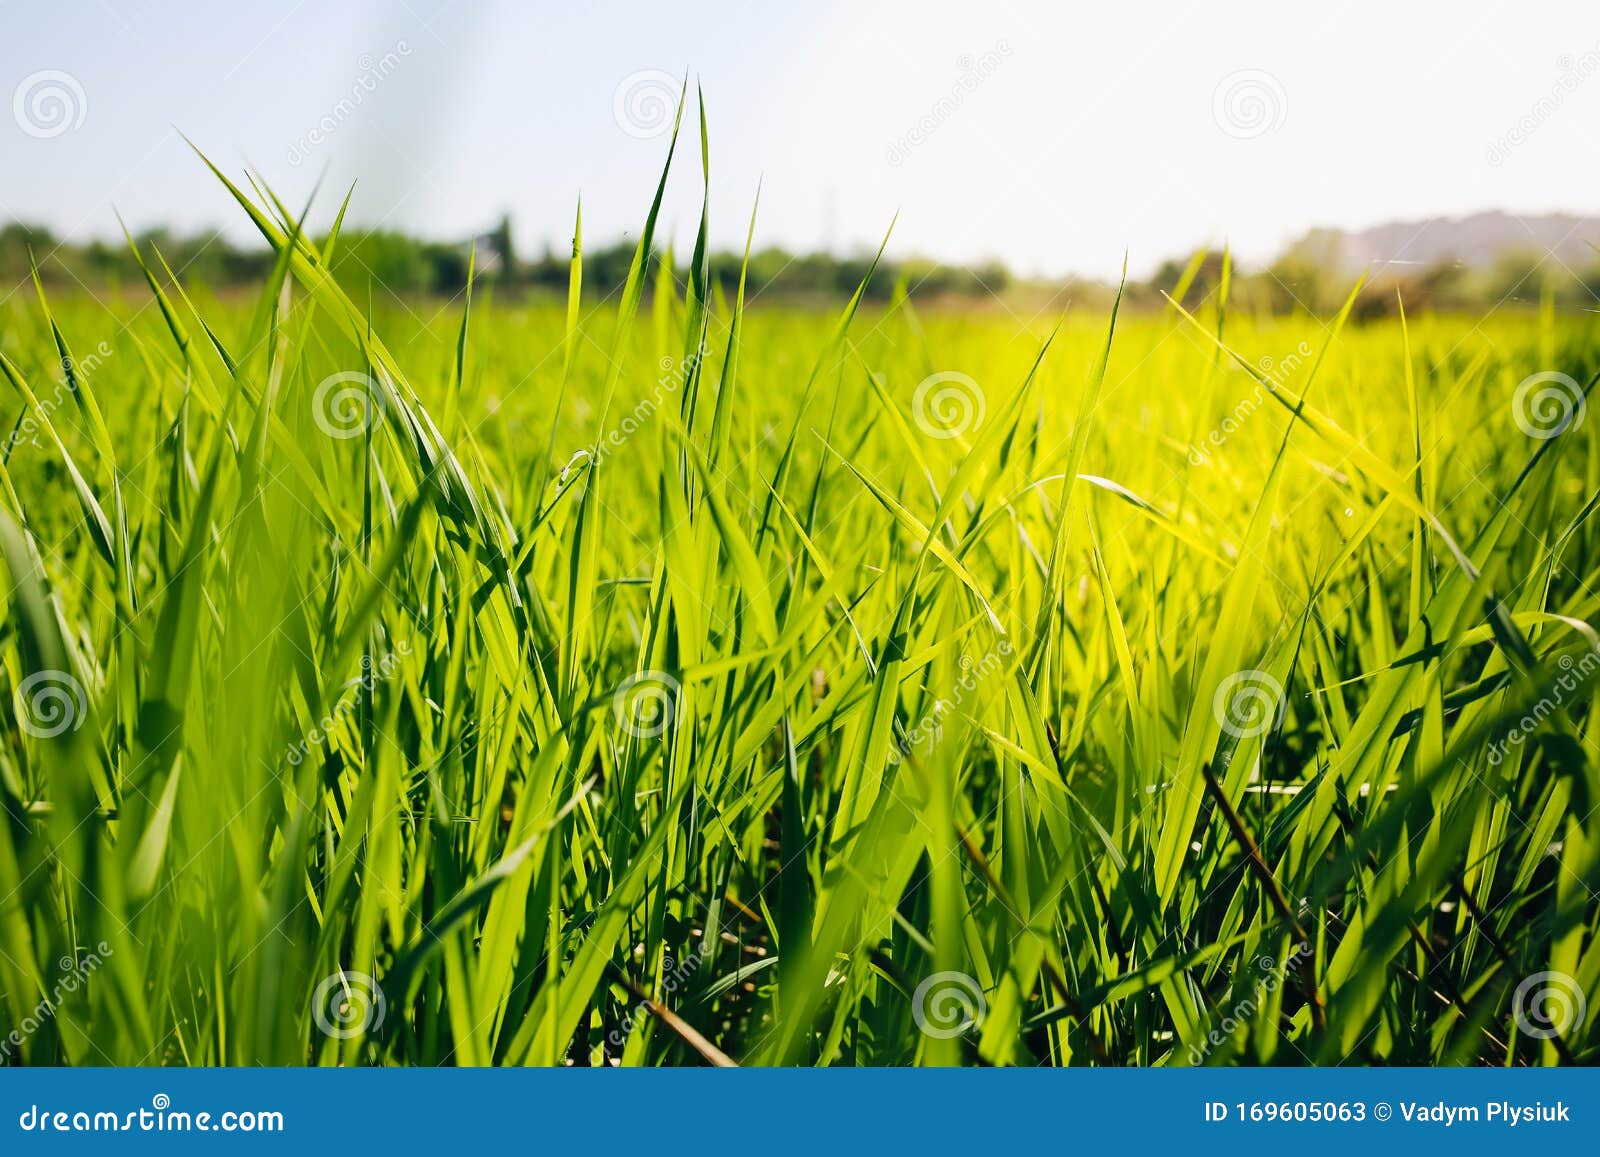 Tall Green Grass in the Field. Summer Spring Meadow Landscape on a